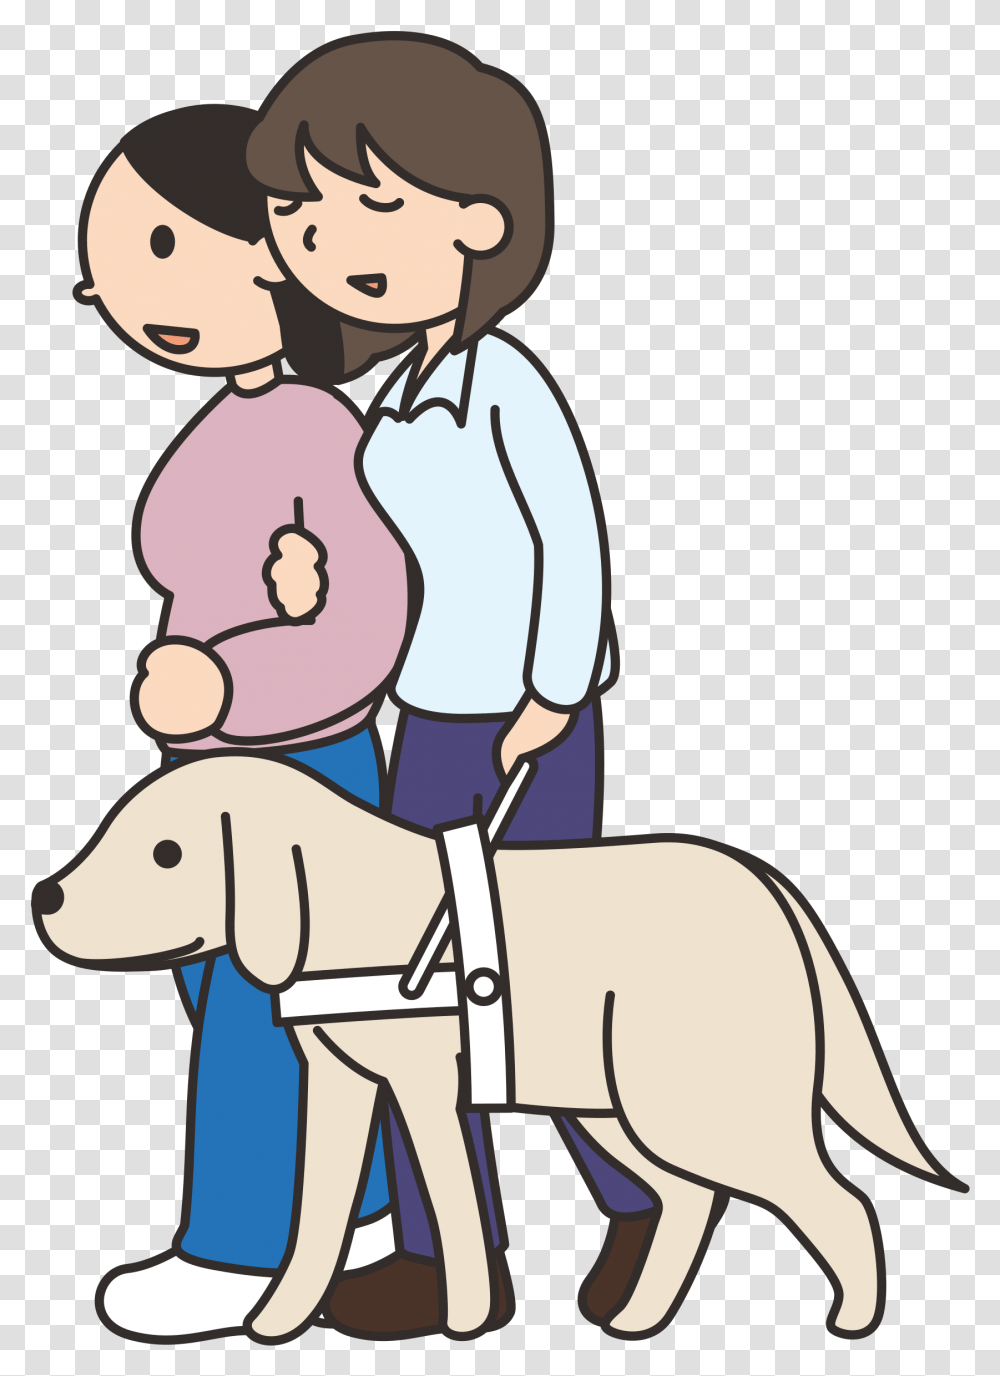 Blind Visually Impaired Woman With A Friend And Guide Clipart Blind, Doctor, Book, Comics, Veterinarian Transparent Png